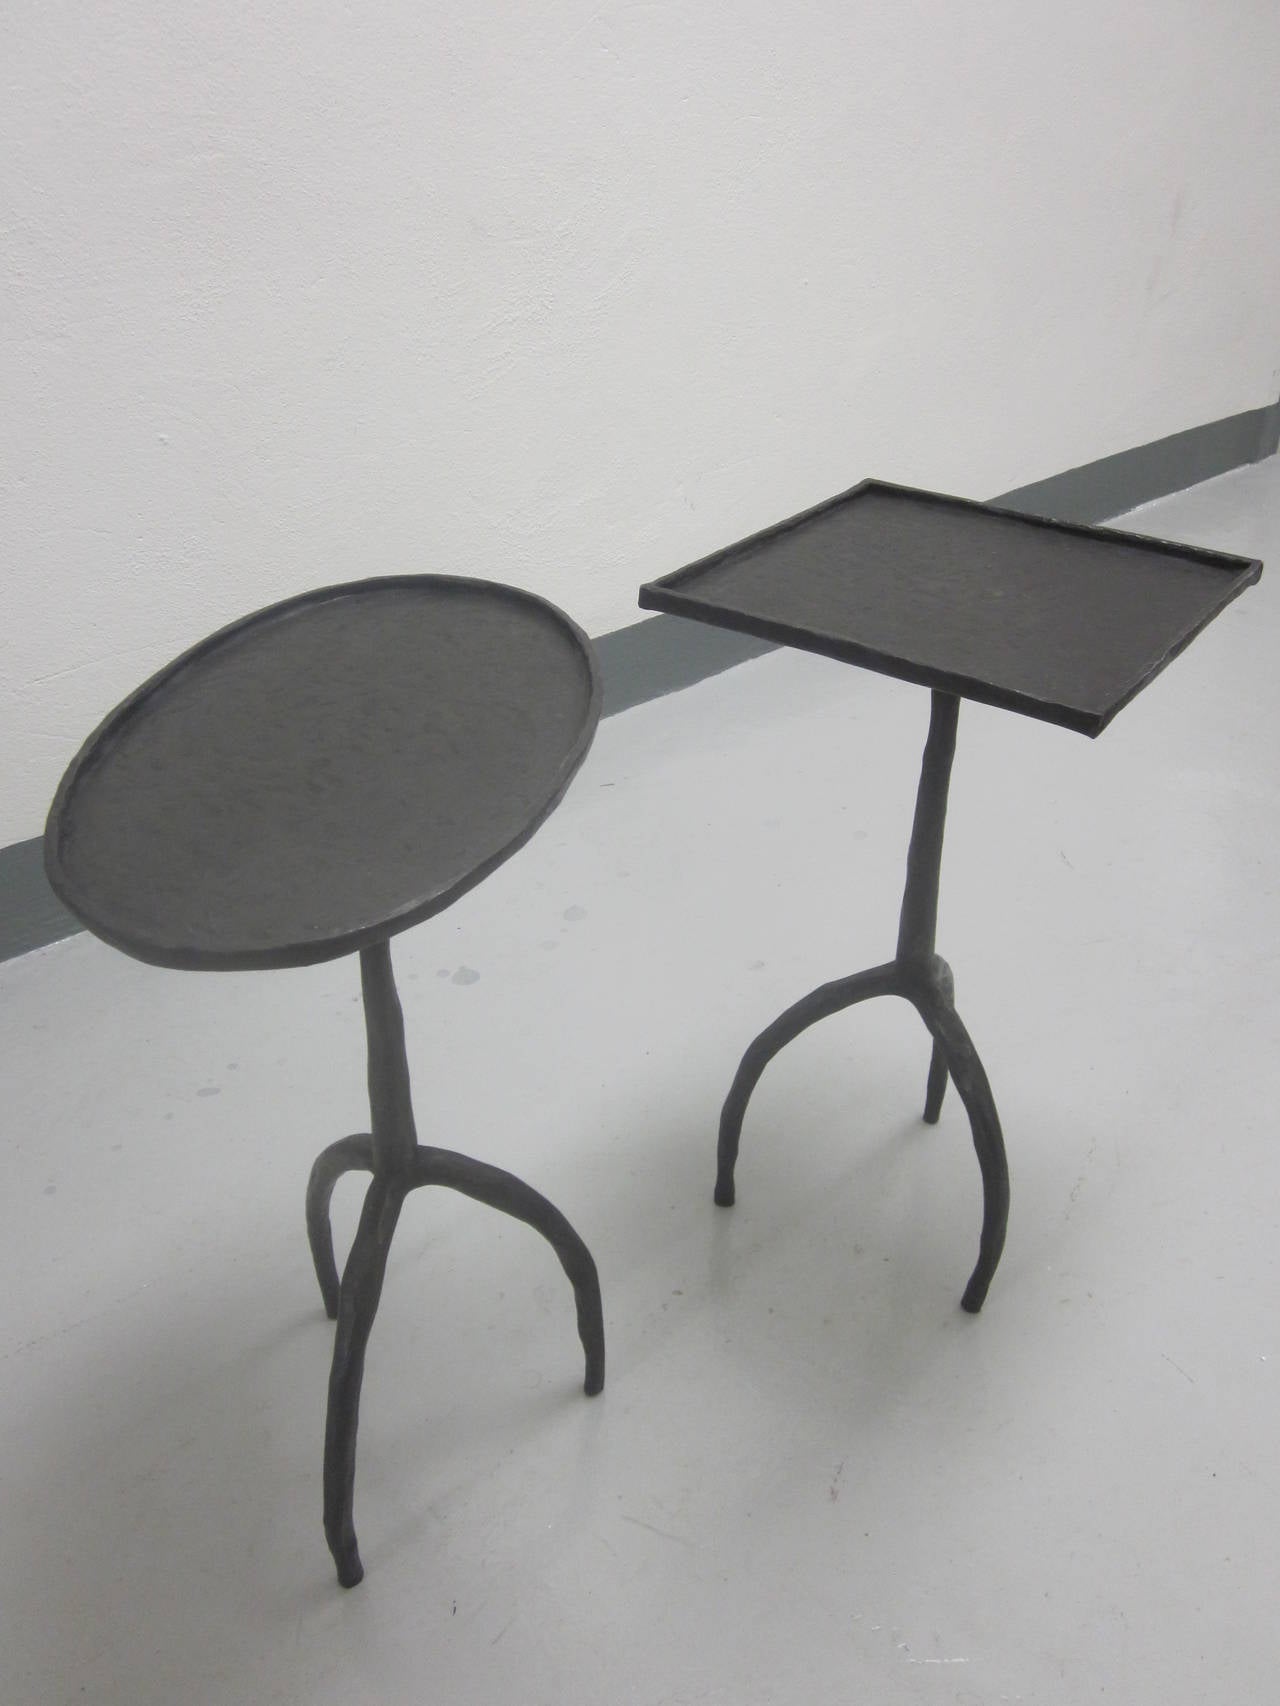 Exquisite and exotic pair of French hand-hammered iron side tables or gueridons or end tables reflecting both Modern and Brutalist sensibilities. Sold by the pair only. 

One with square top, the second with an oval top. The table with square top